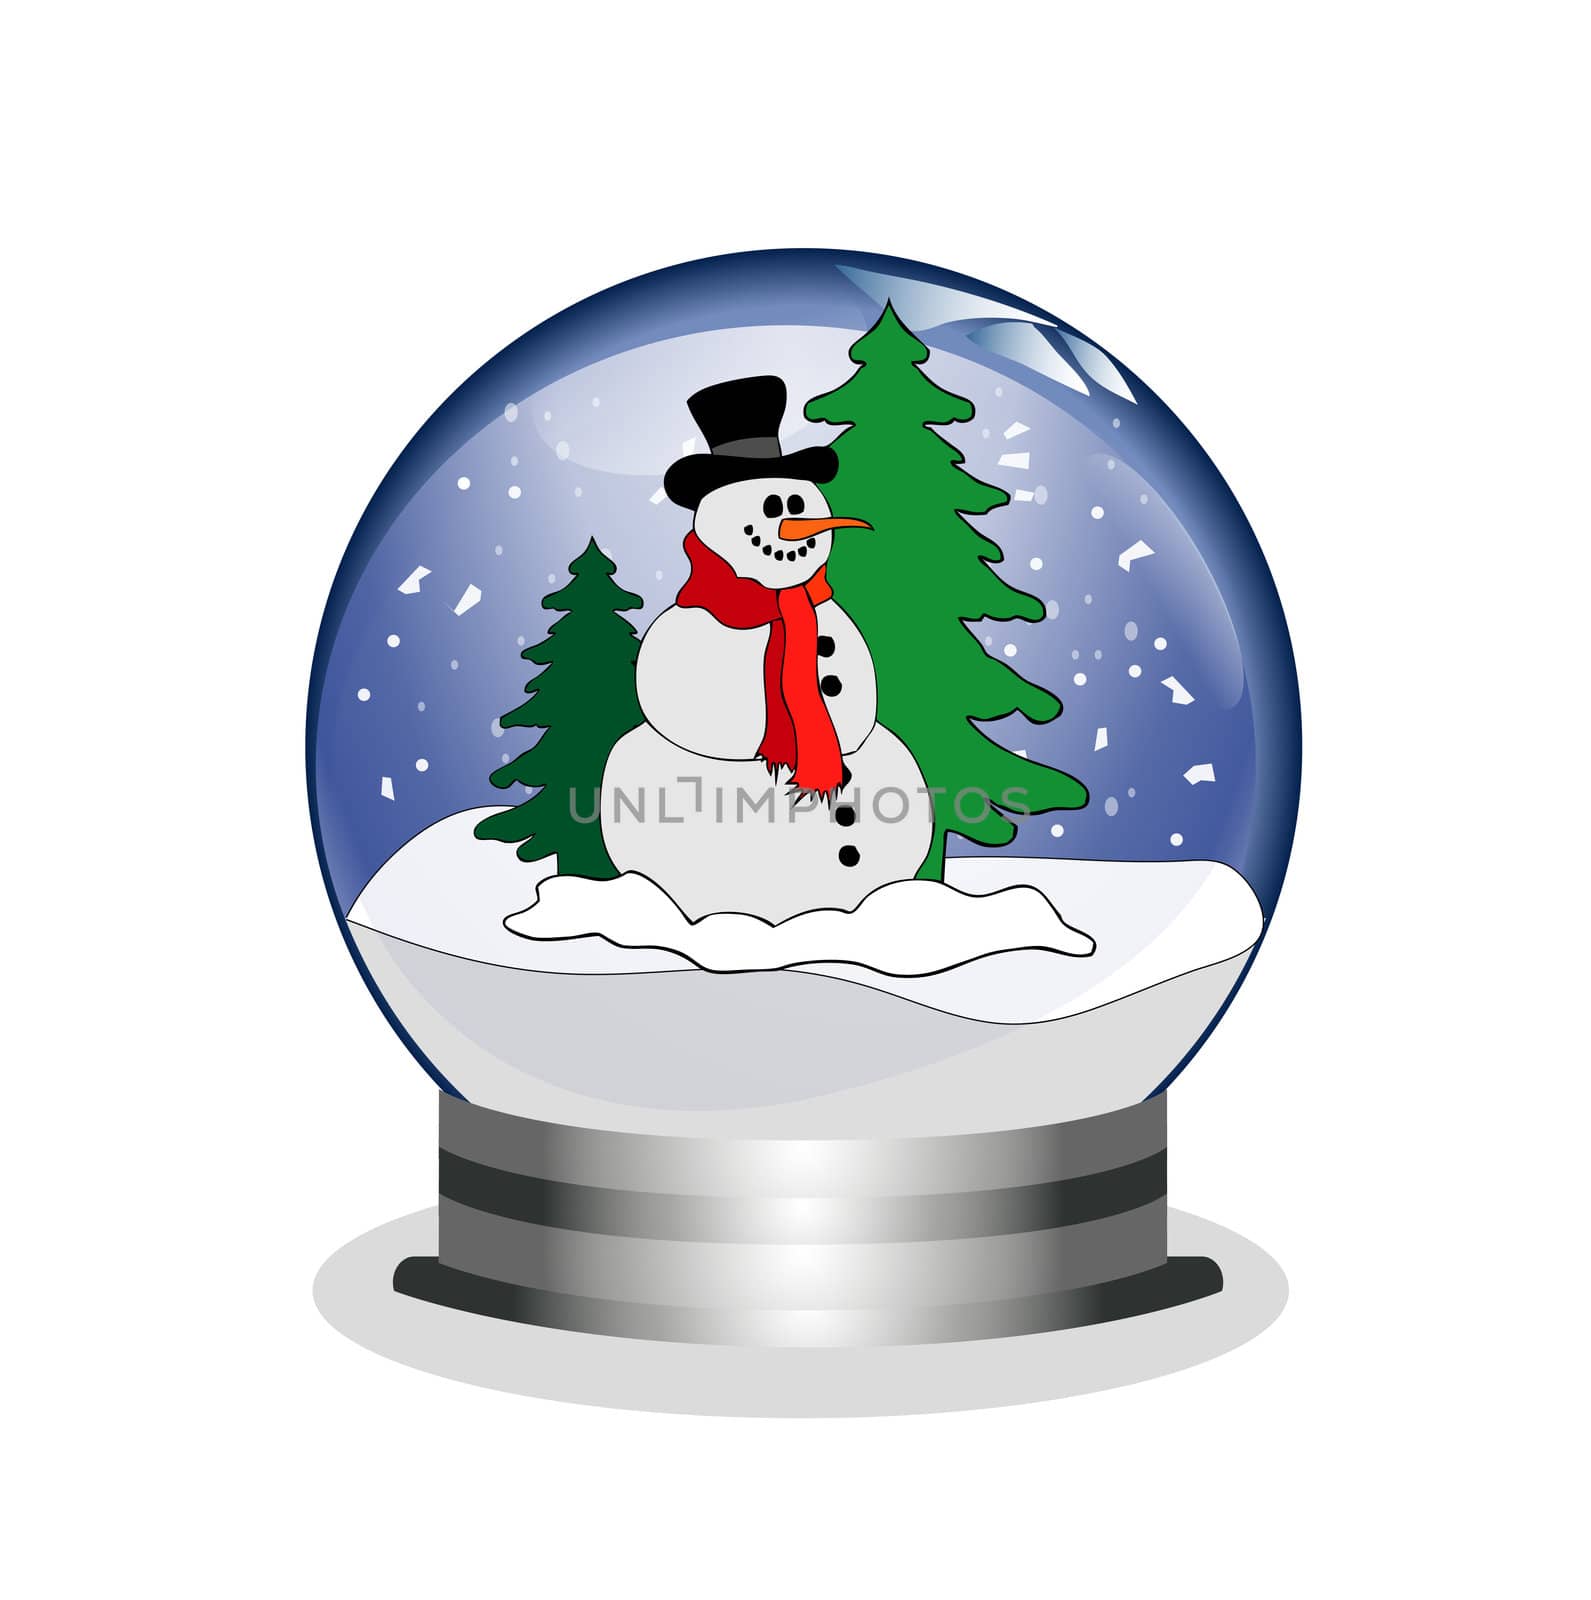 snowglobe with snowman by peromarketing